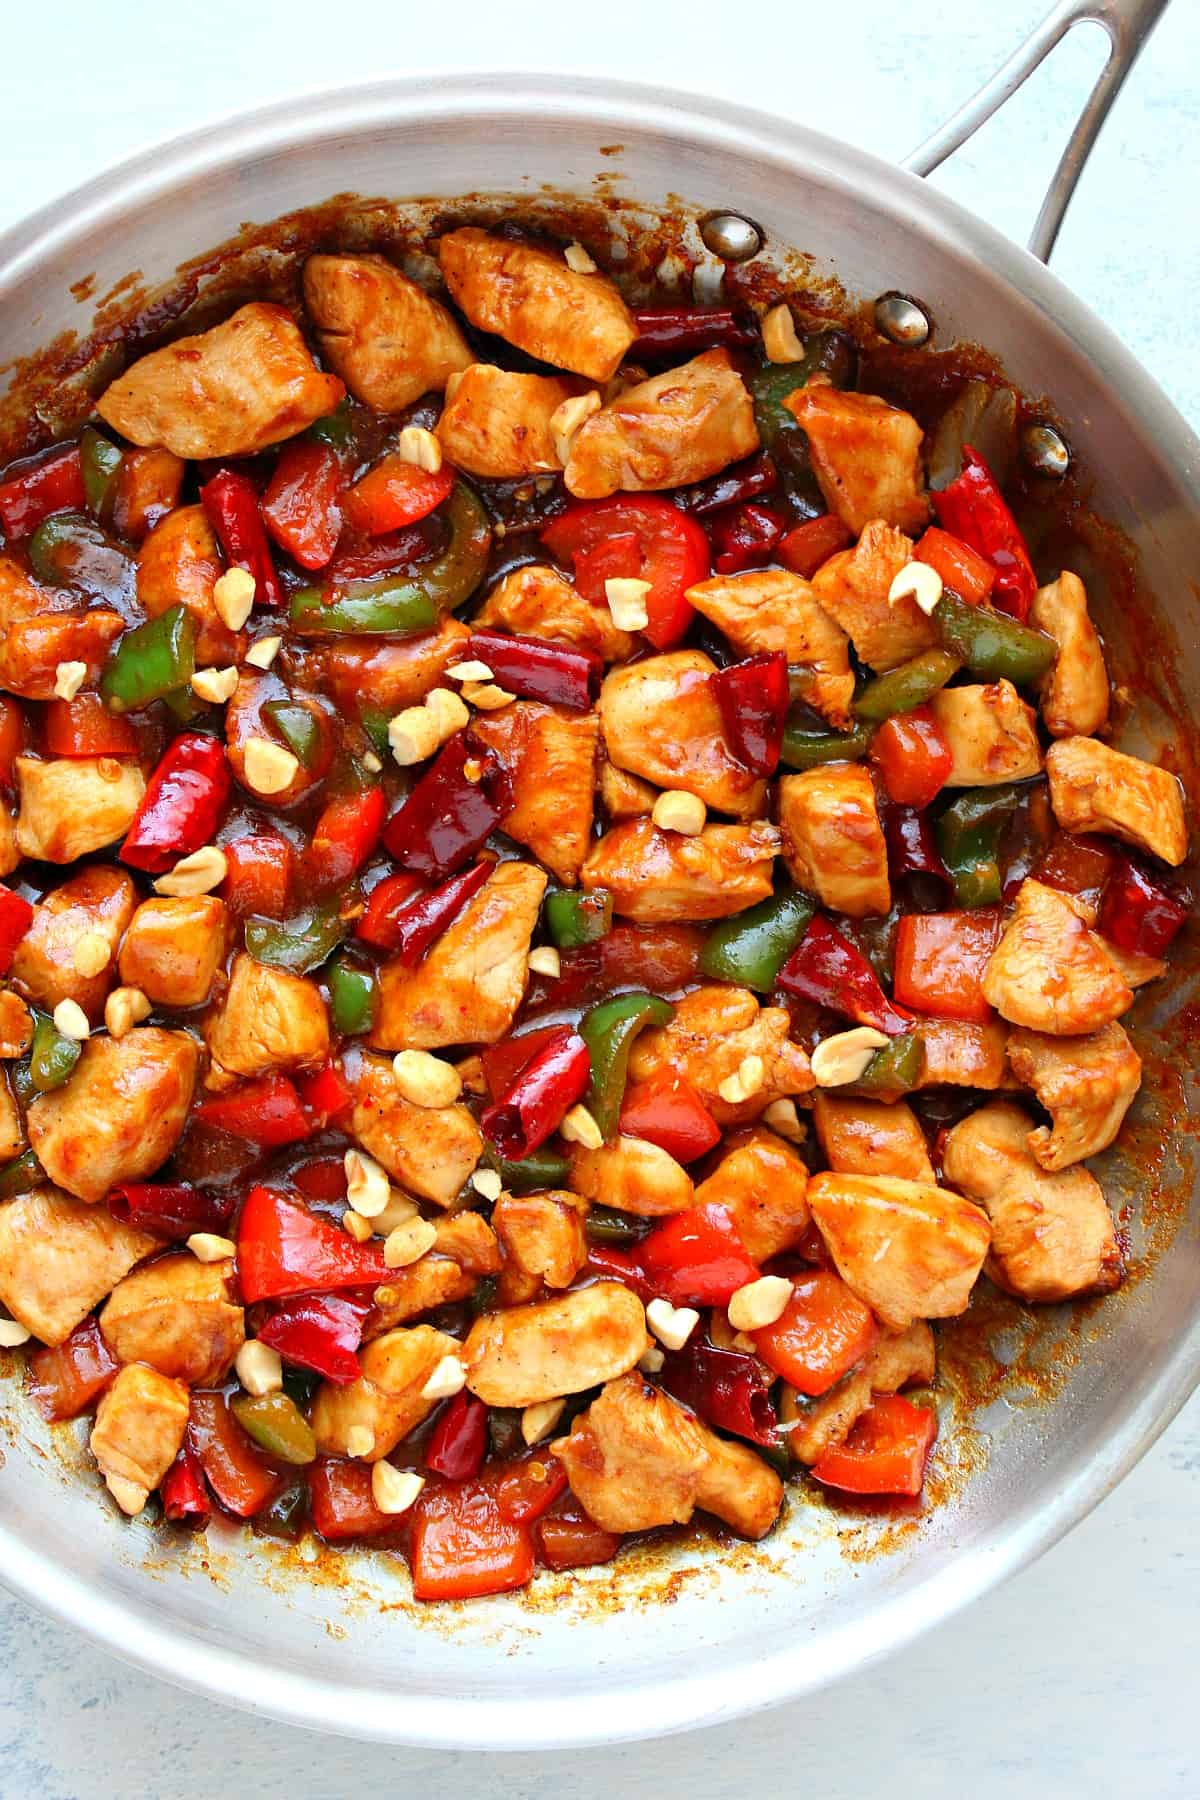 kung pao chicken A1 Kung Pao Chicken